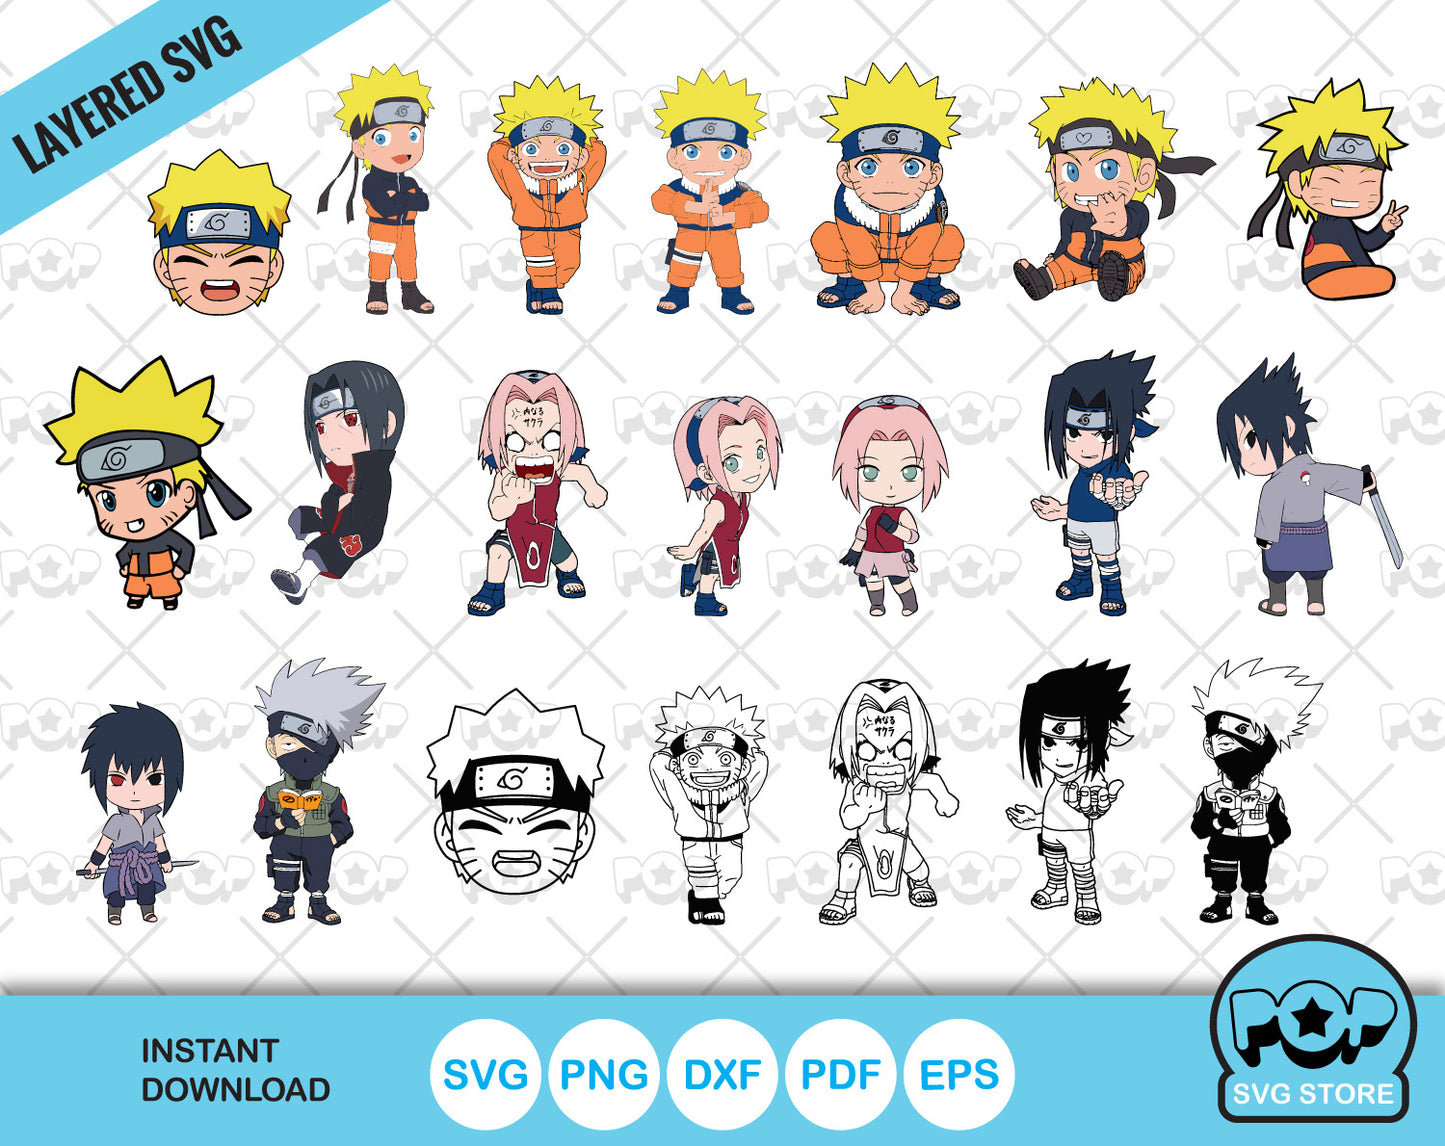 Chibi Naruto Clipart Set, Naruto SVG cut files for Cricut / Silhouette, SVG, PNG, DXF, instant download